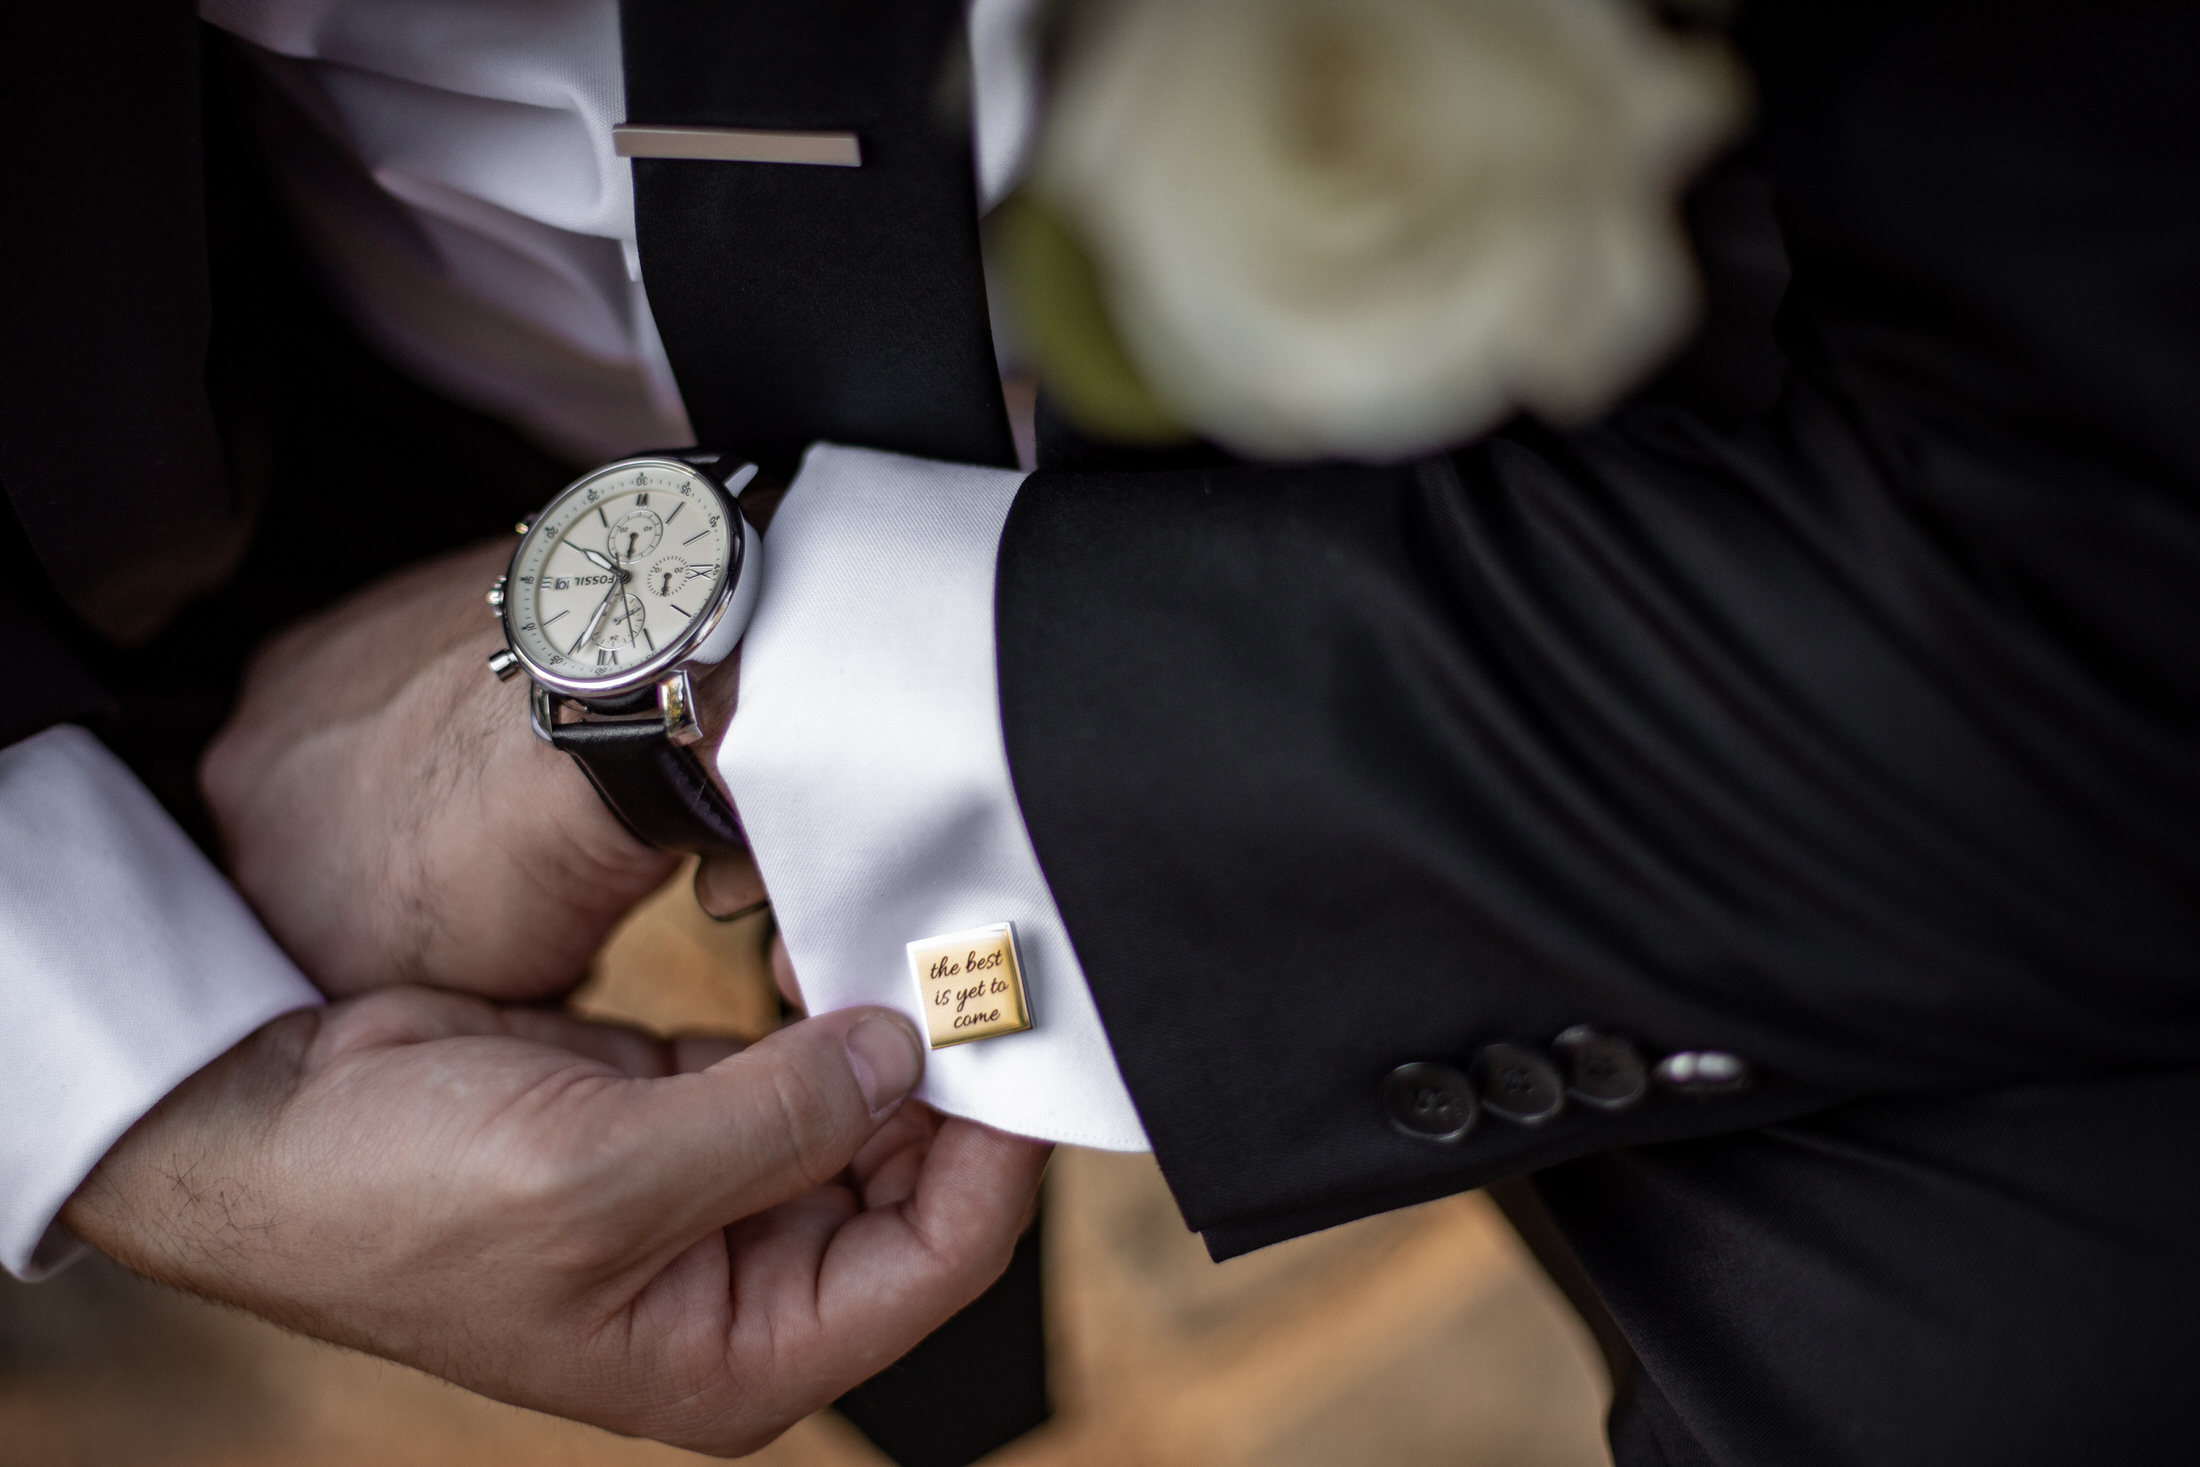 The grooms cufflinks and watch.